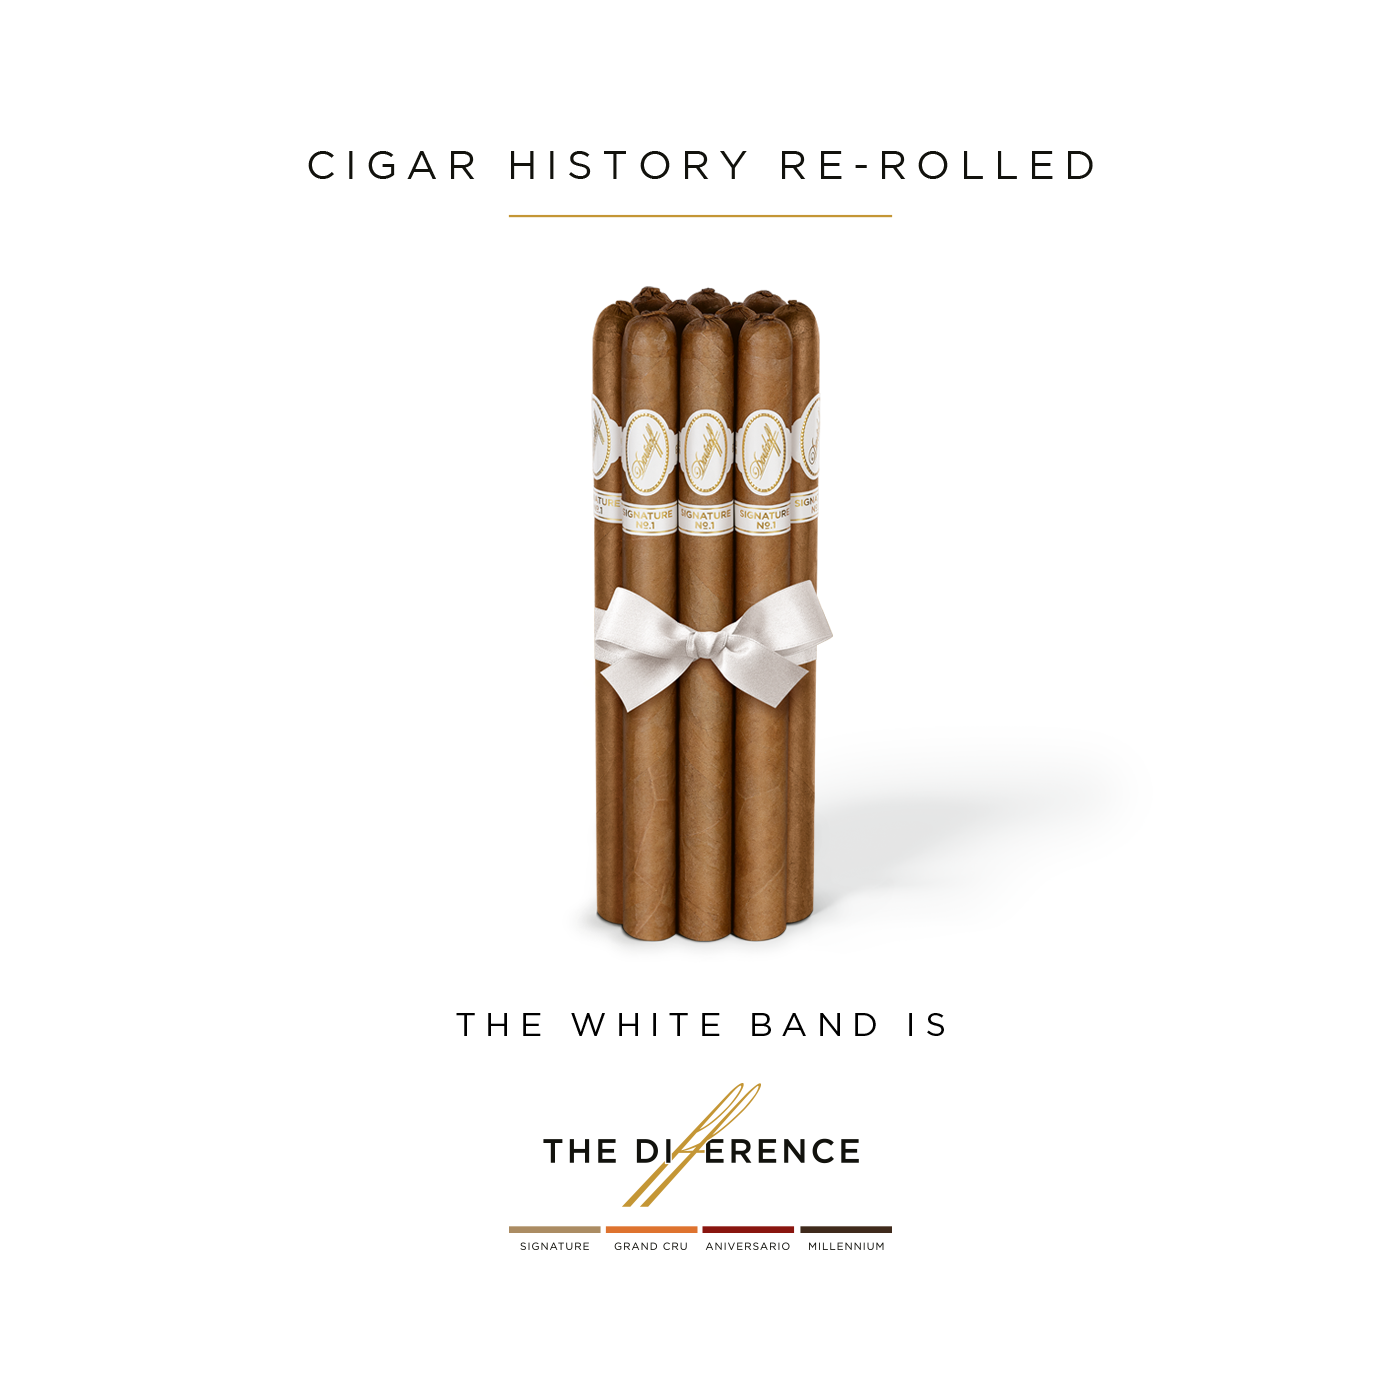 10 Davidoff Signature No. 1 Limited Edition Collection cigars bundled up with a bow, standing there like a rocket ready to take off.